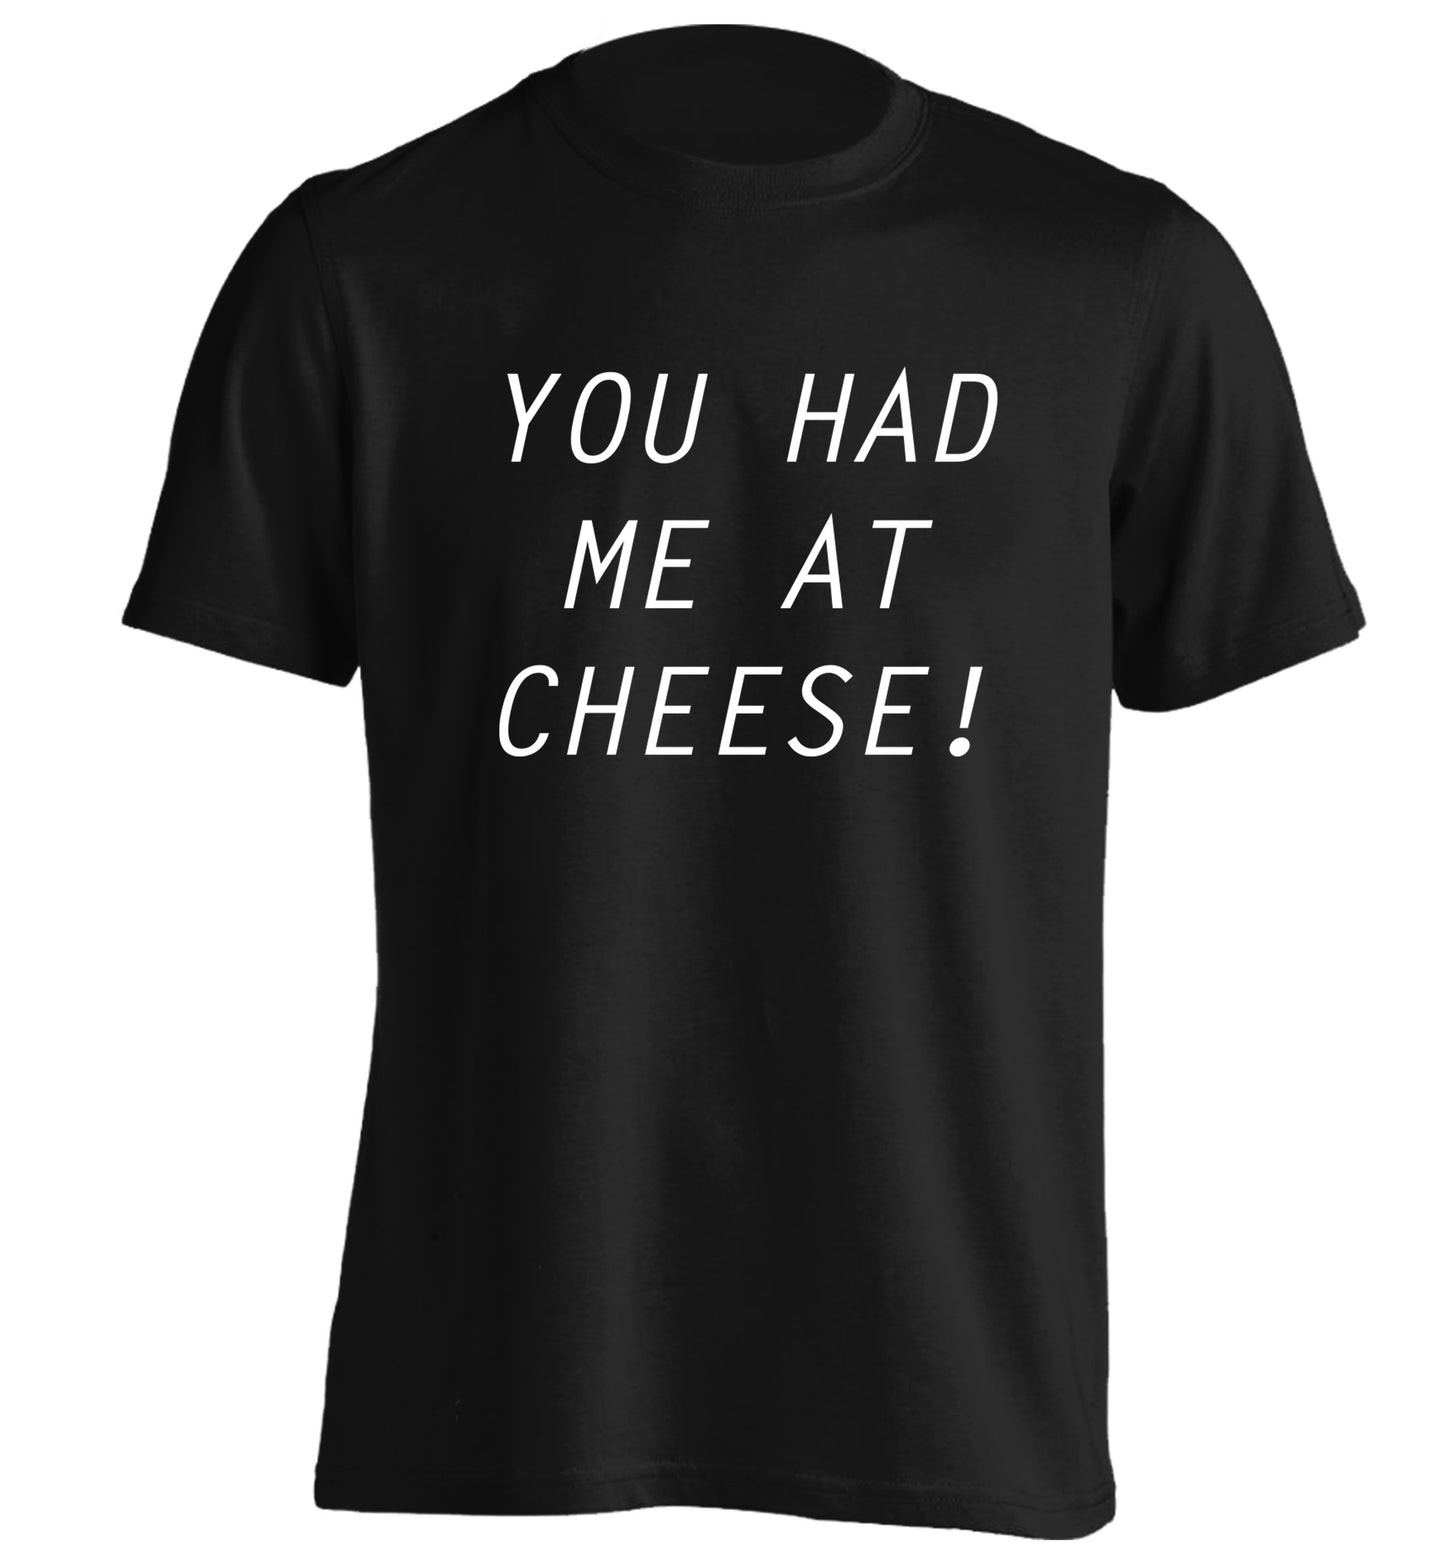 You had me at cheese adults unisex black Tshirt 2XL